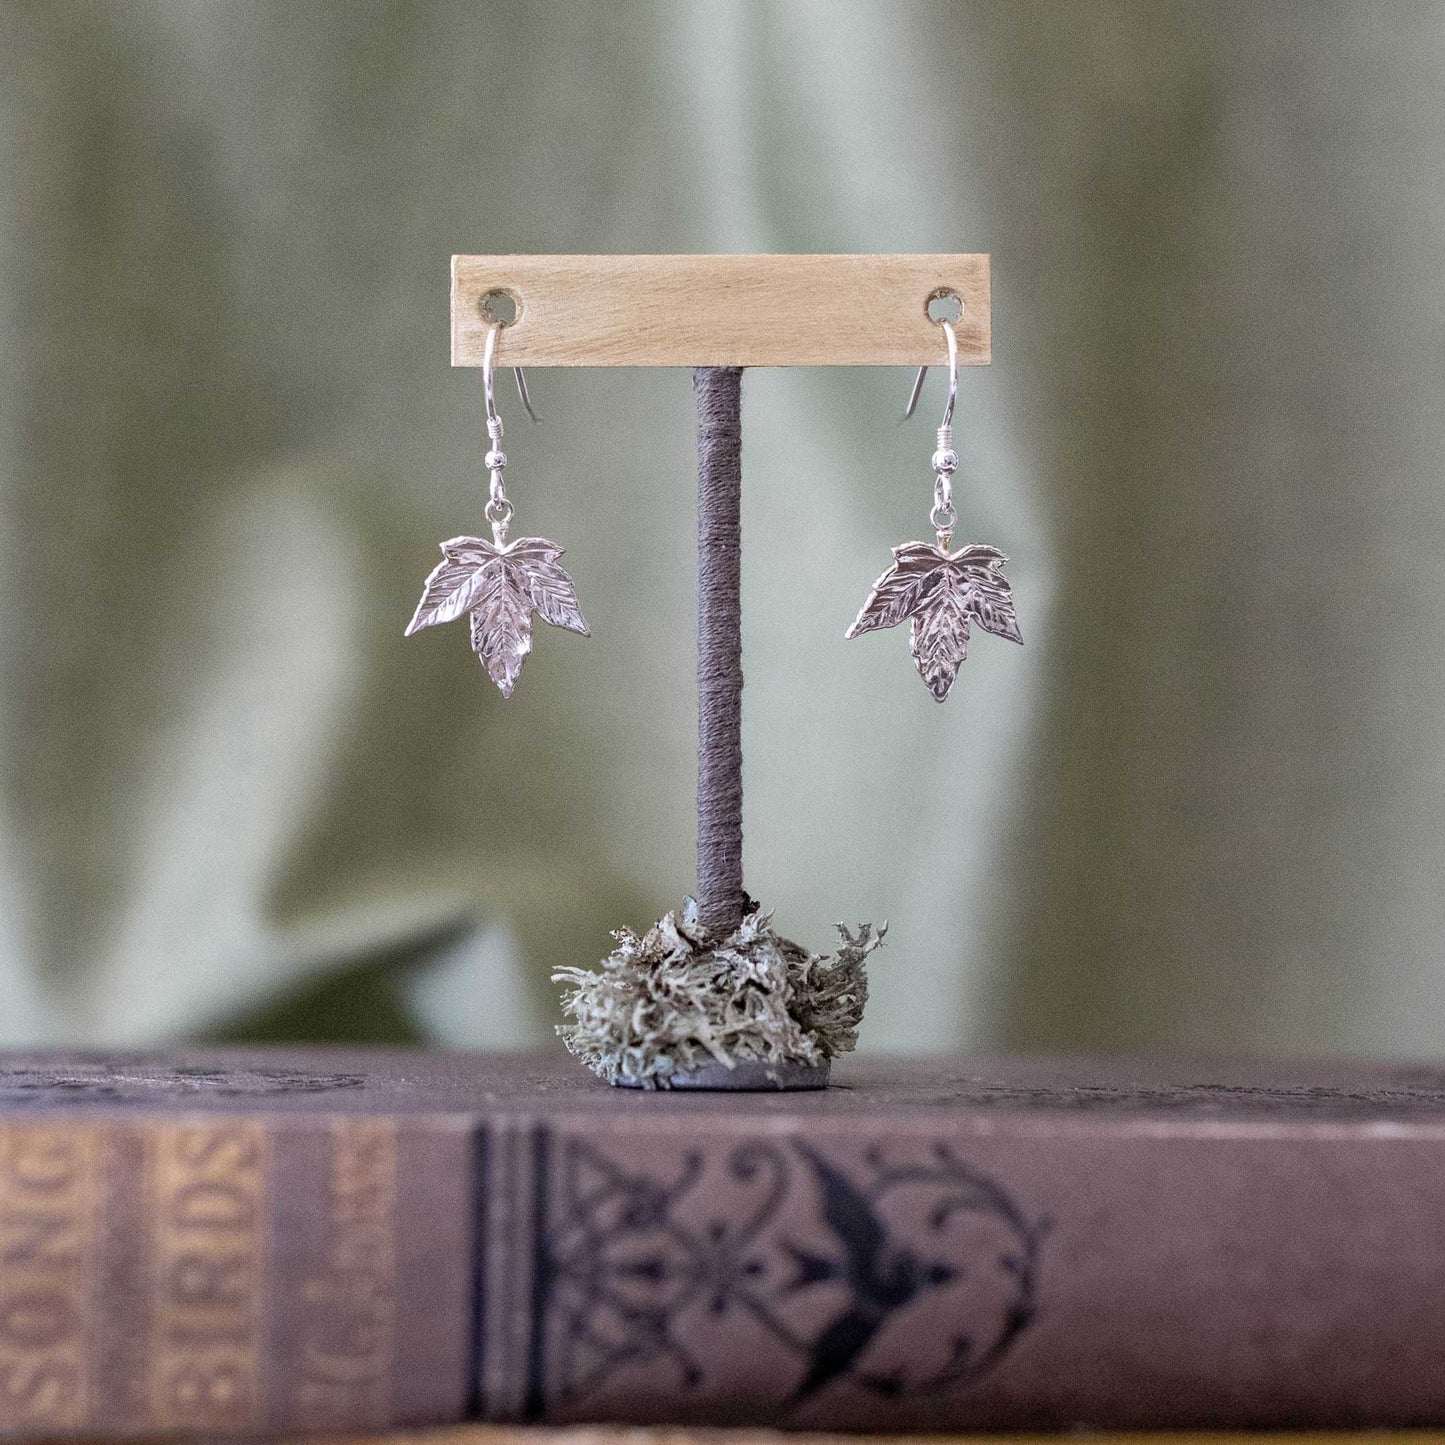 Sycamore leaf earrings handcrafted in sterling silver. 